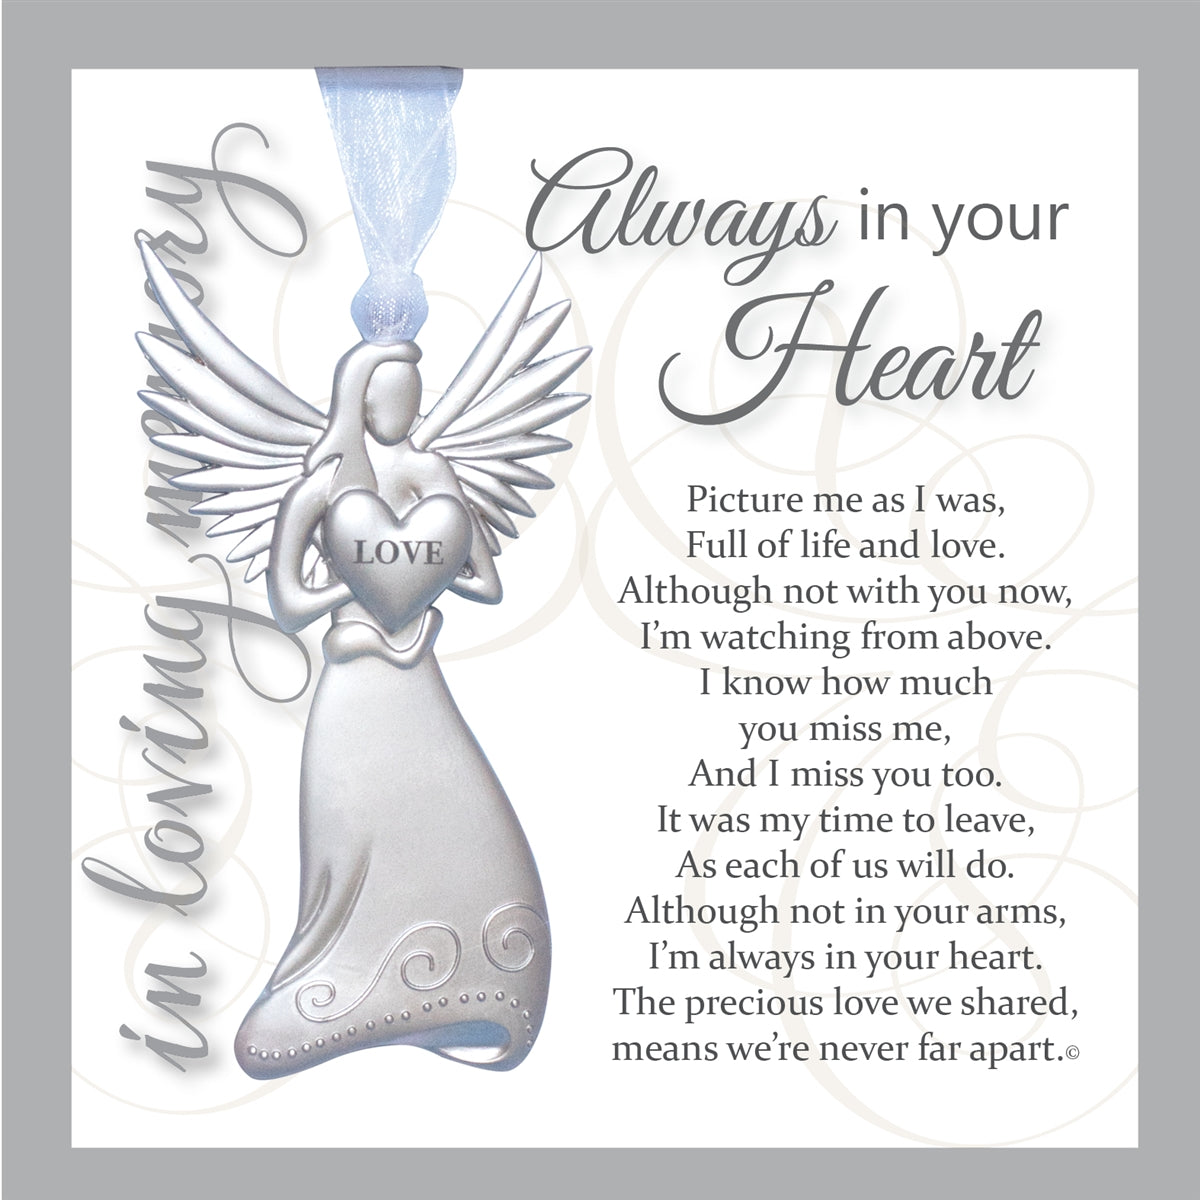 Memorial Gift - 4" metal love angel ornament with "Always in your Heart" sentiment